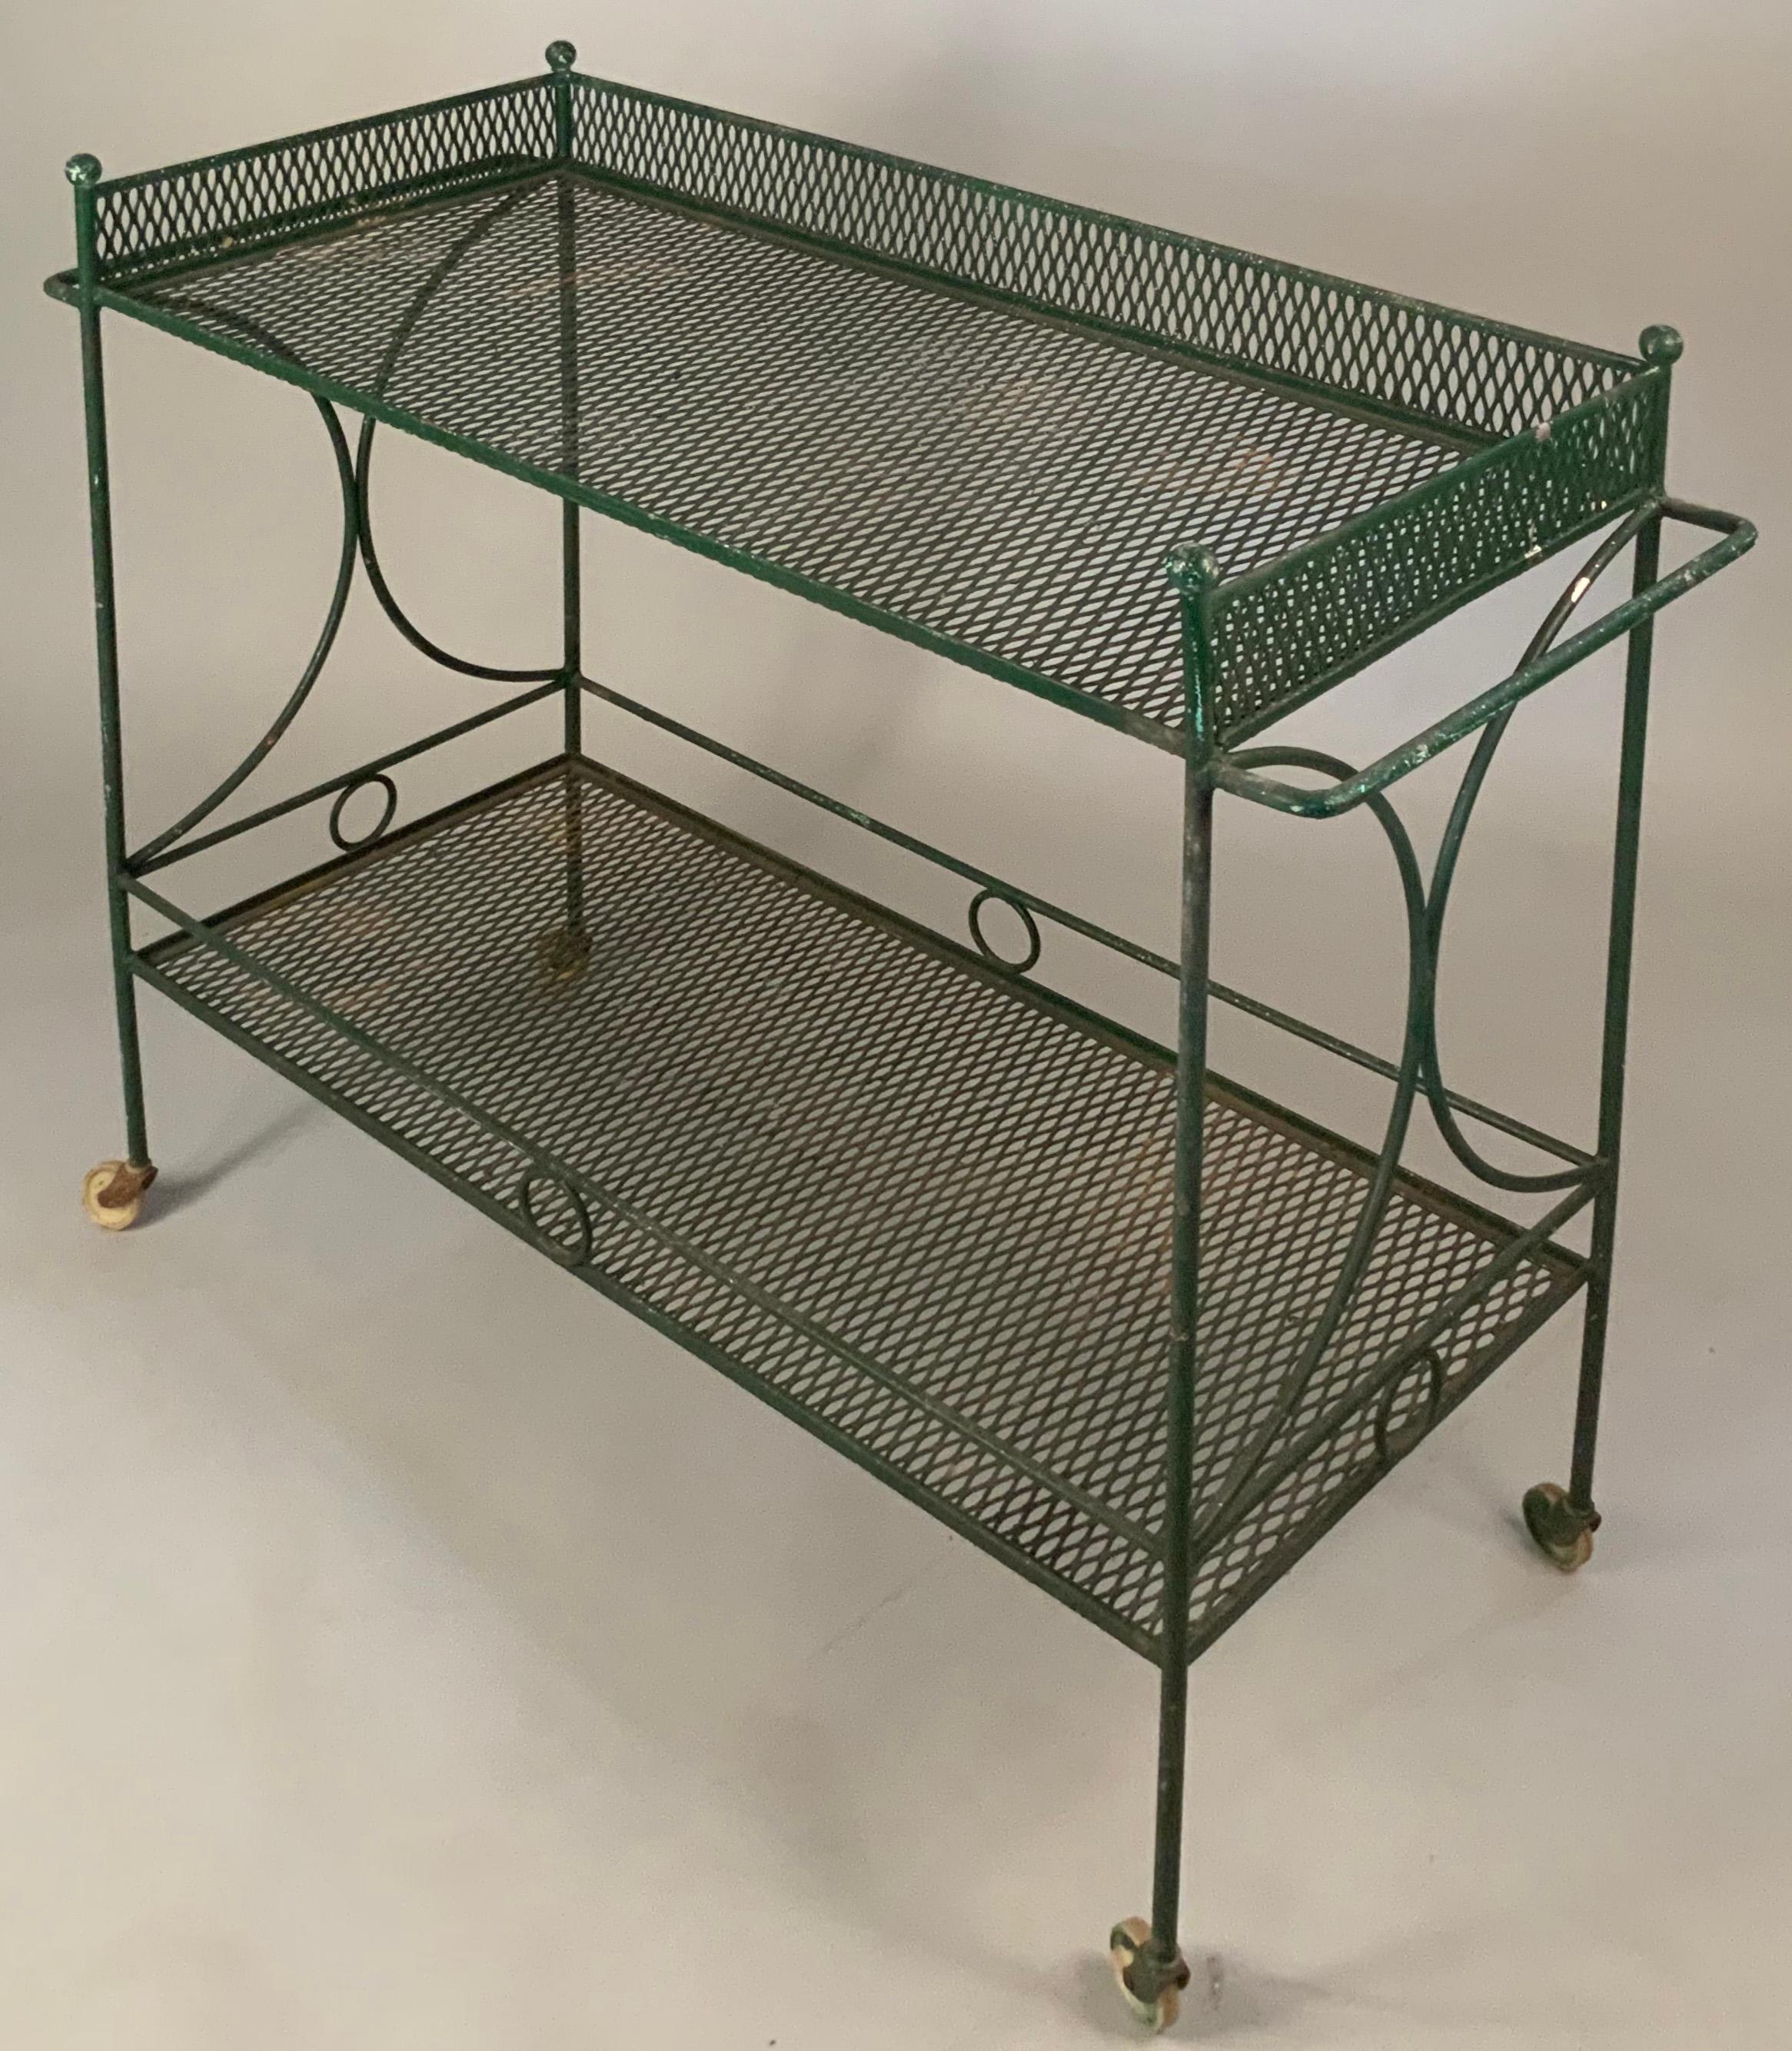 A classic modern wrought iron bar cart c. 1950 by Salterini. Elegant large frame, with 2 full expanded mesh shelves, which could have glass tops cut for them, each with gallery rail. The sides have semi-circular design, and the corners have ball